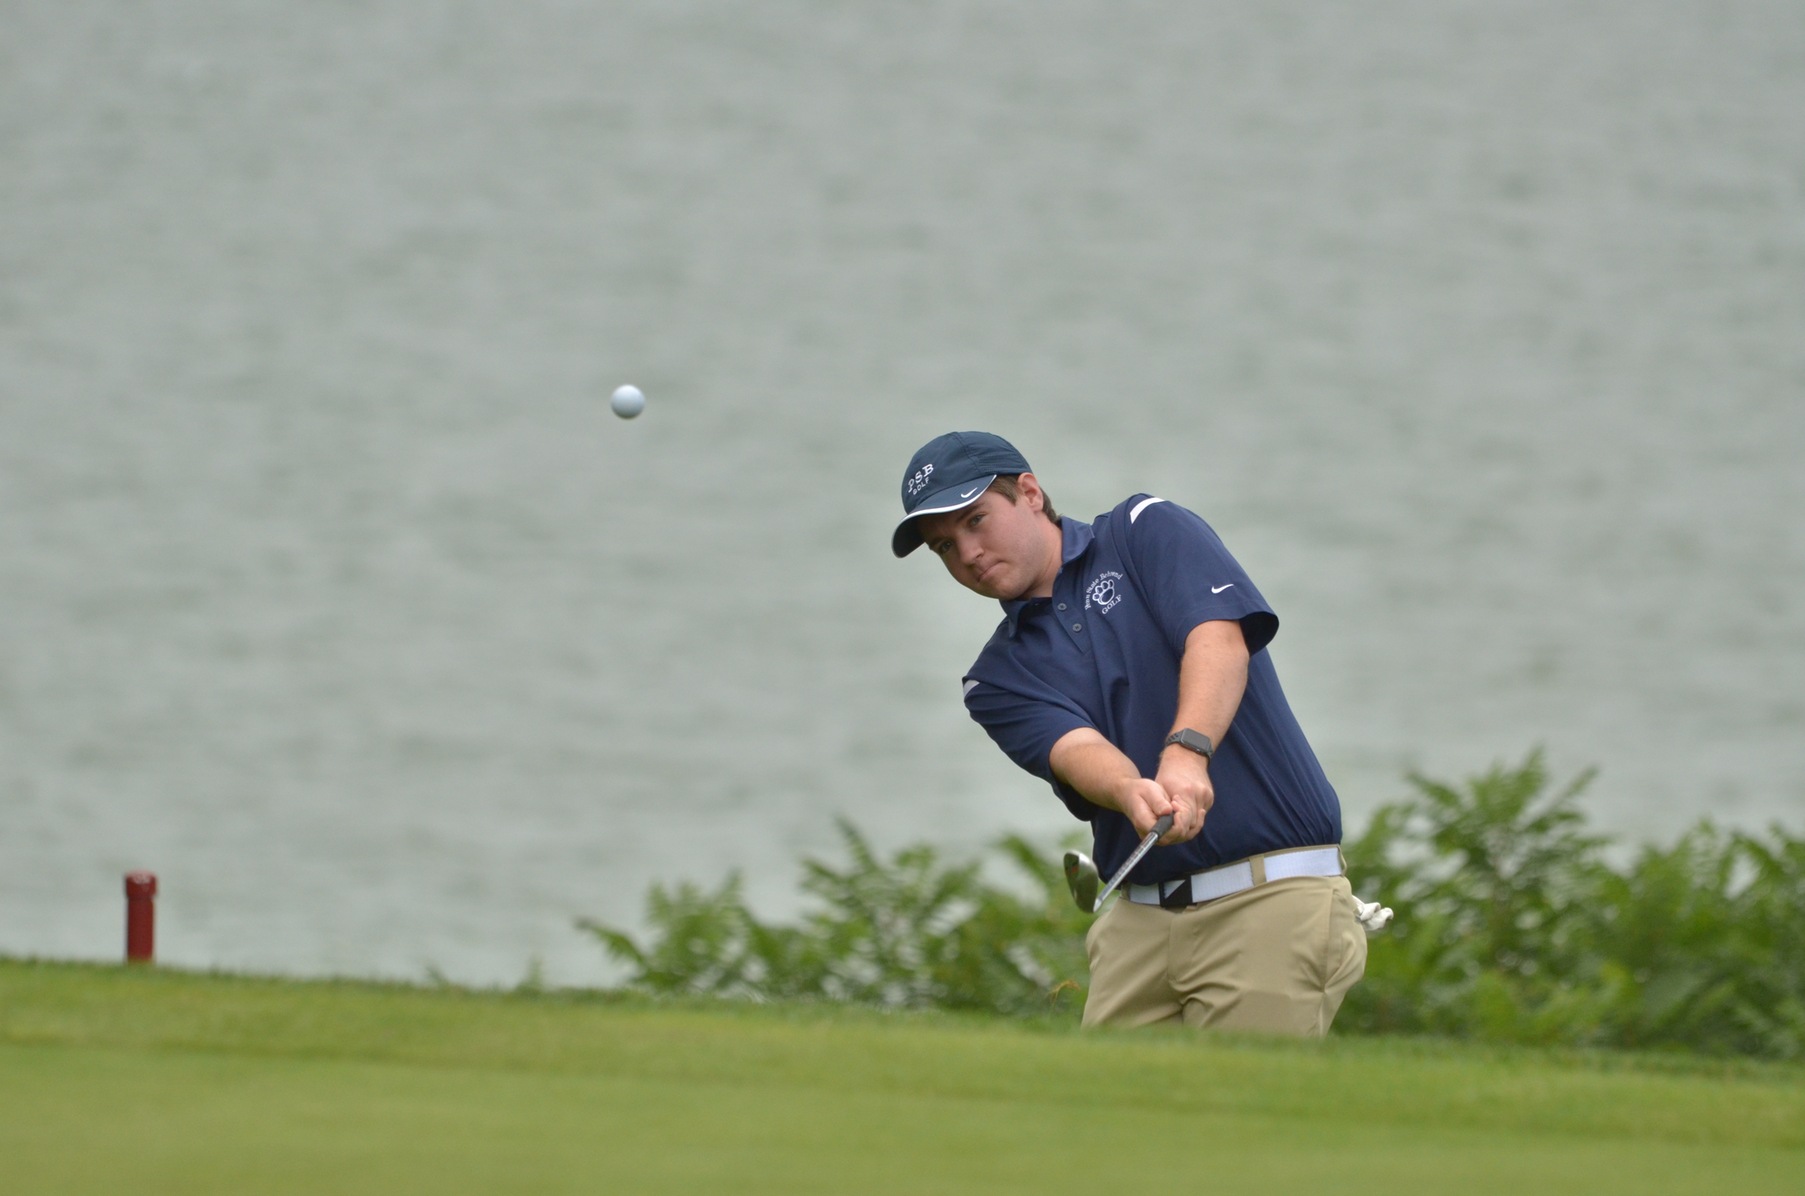 Men's Golf Set to Compete at Two-Day Allegheny Invitational